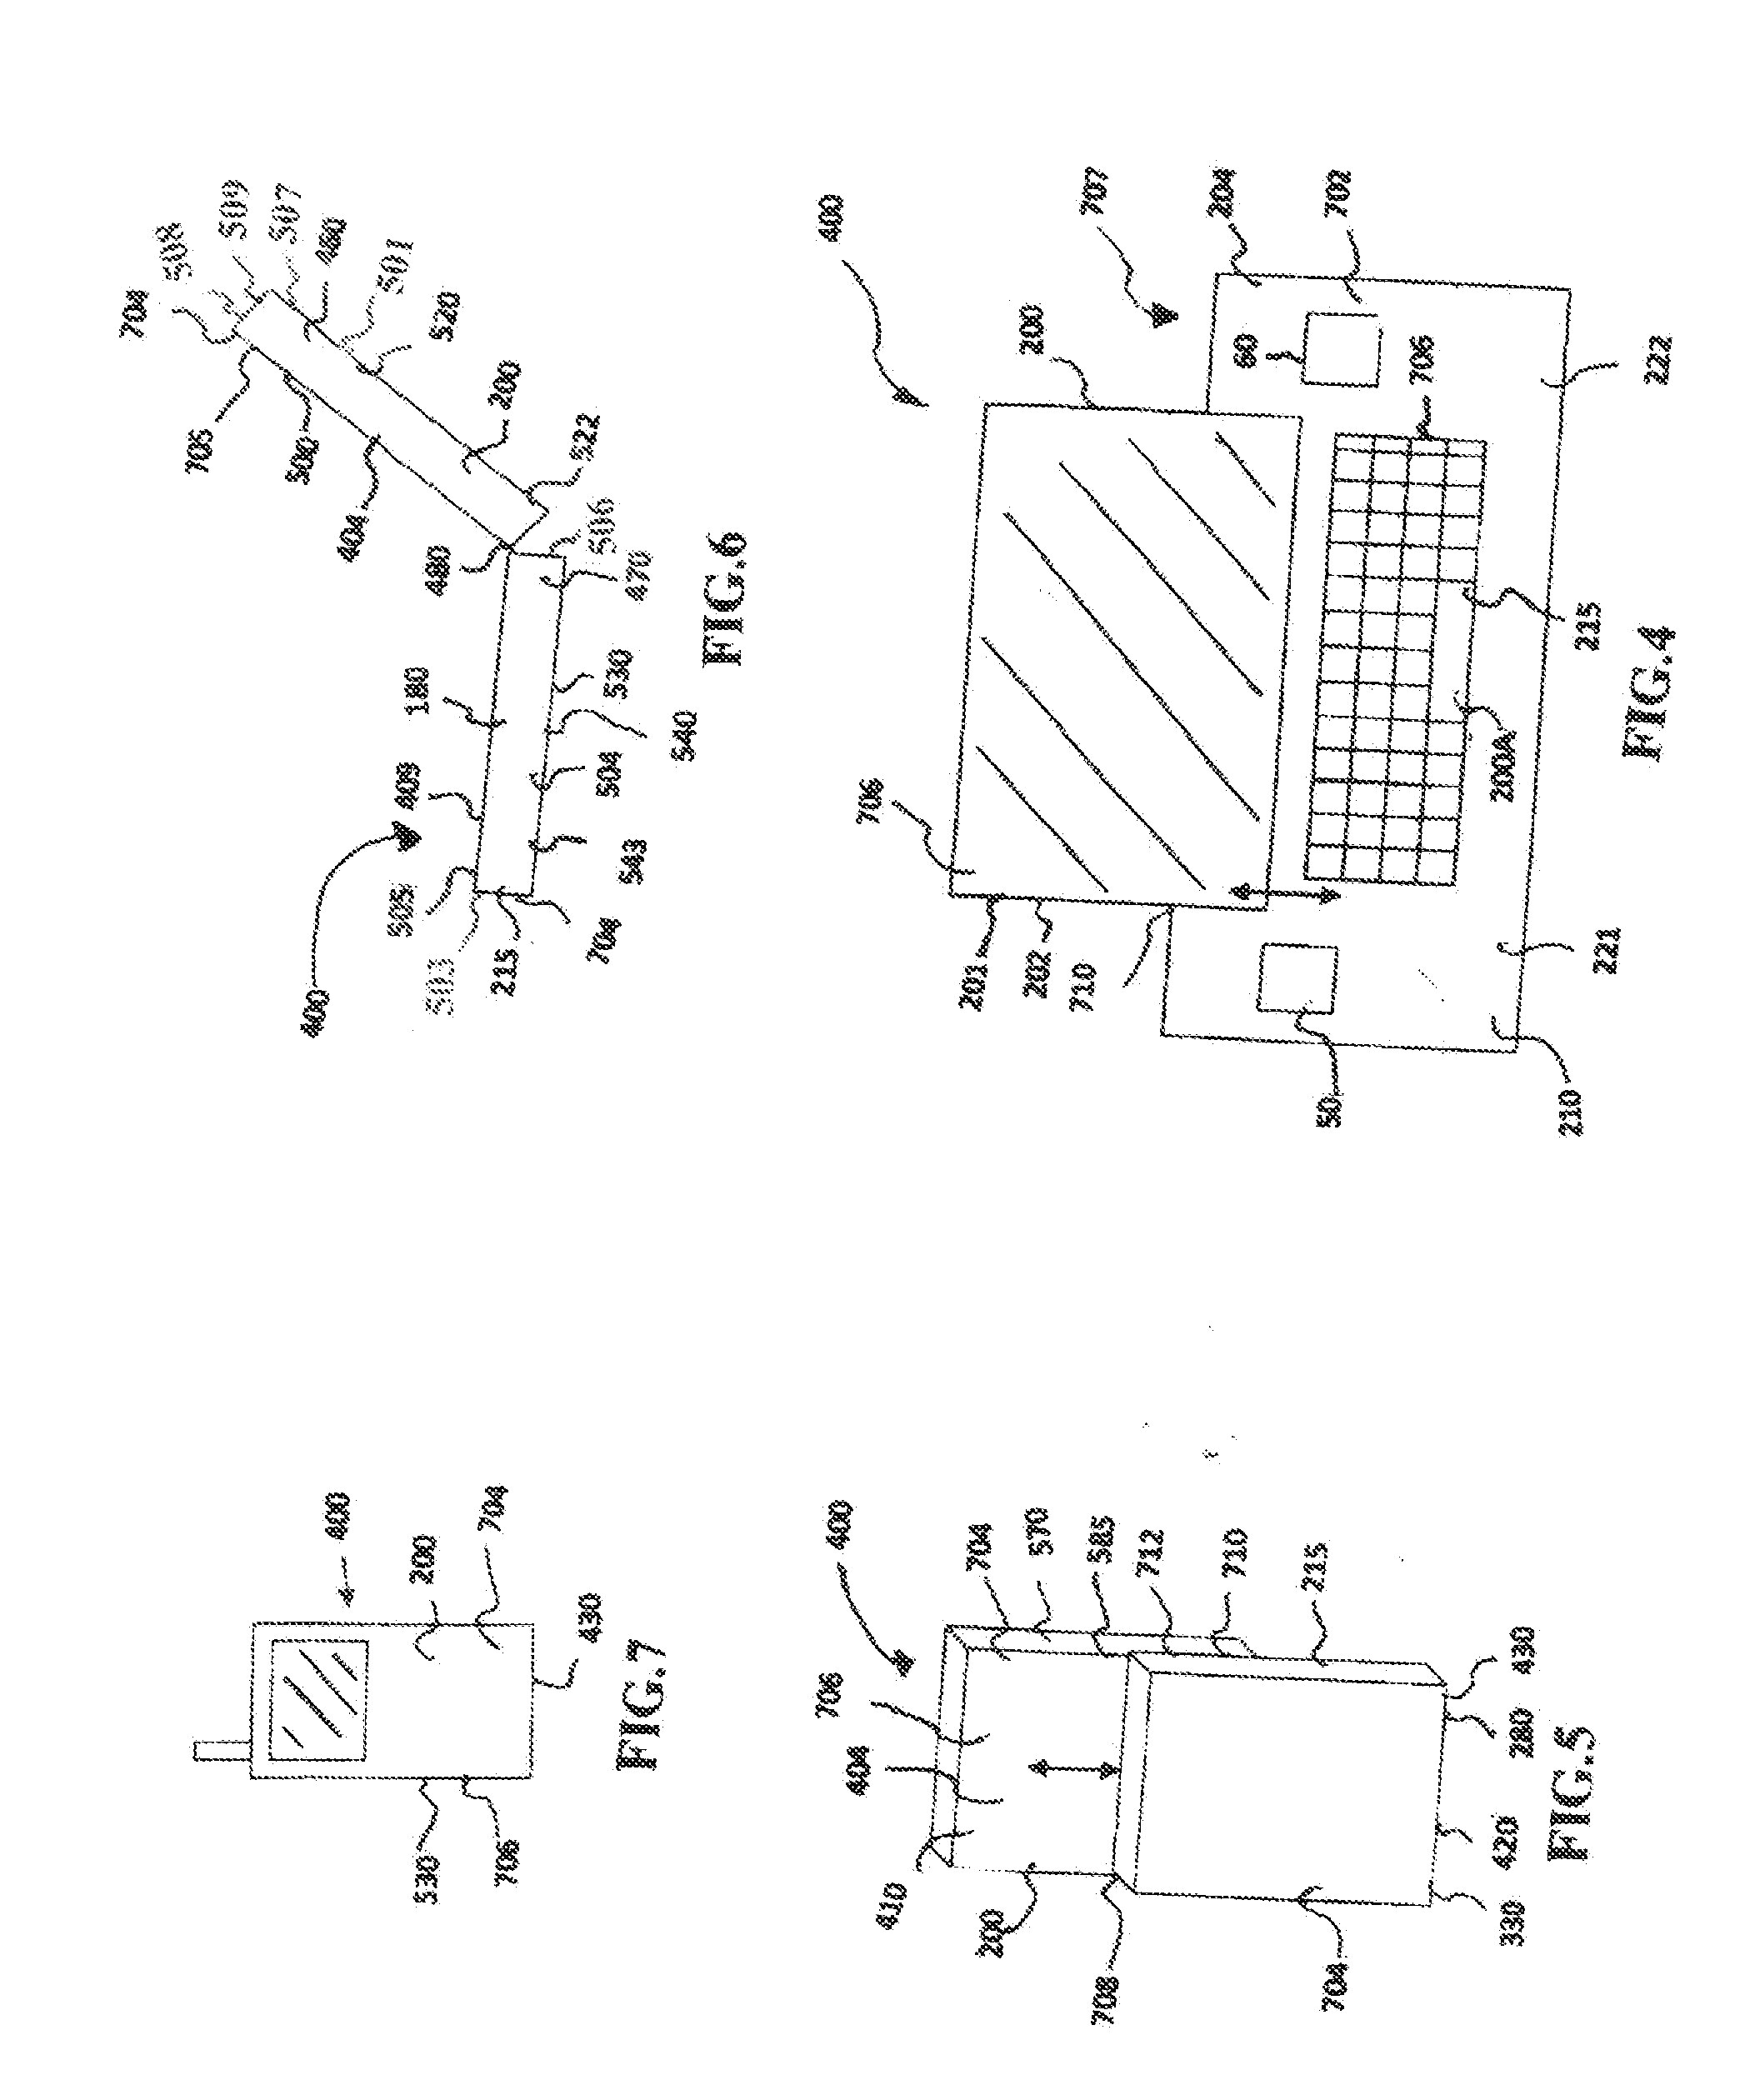 Mega communication and media apparatus configured to provide faster data transmission speed and to generate electrical energy